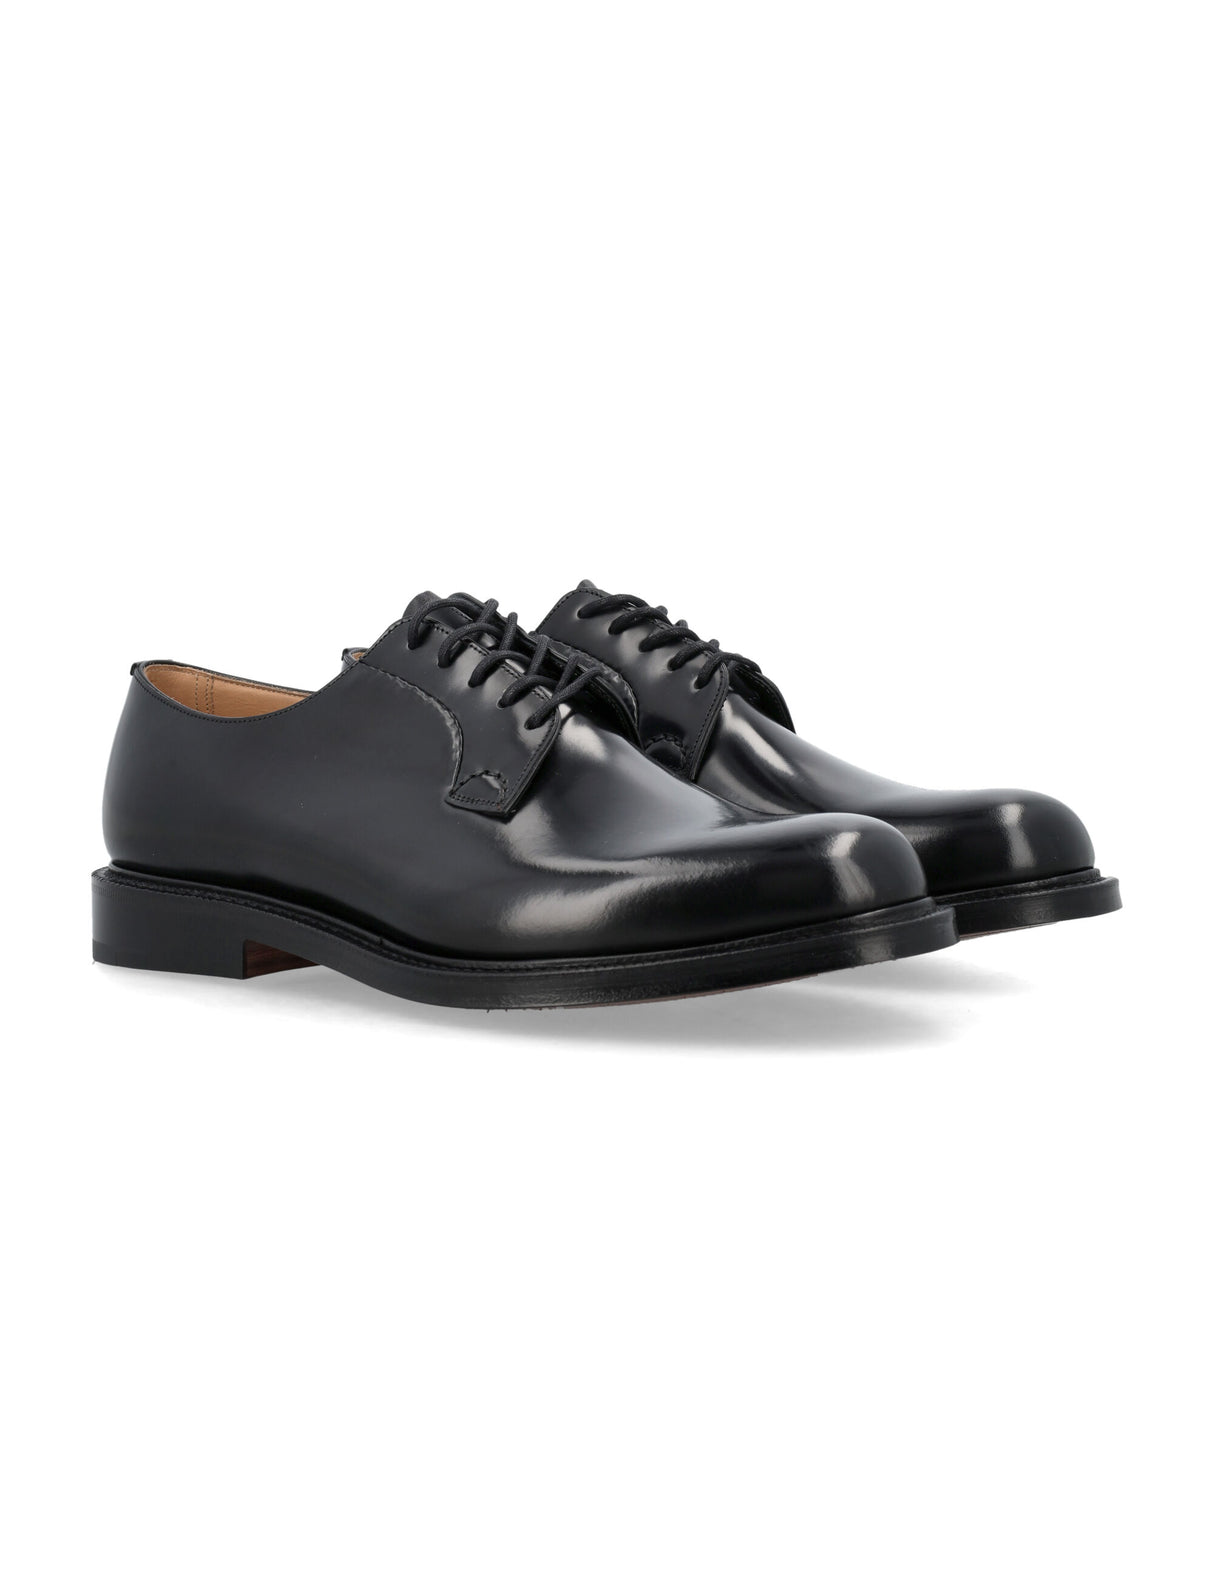 CHURCH'S Men's Black Leather Derby Dress Shoes with Lace-Up Fastening and Double-Sole